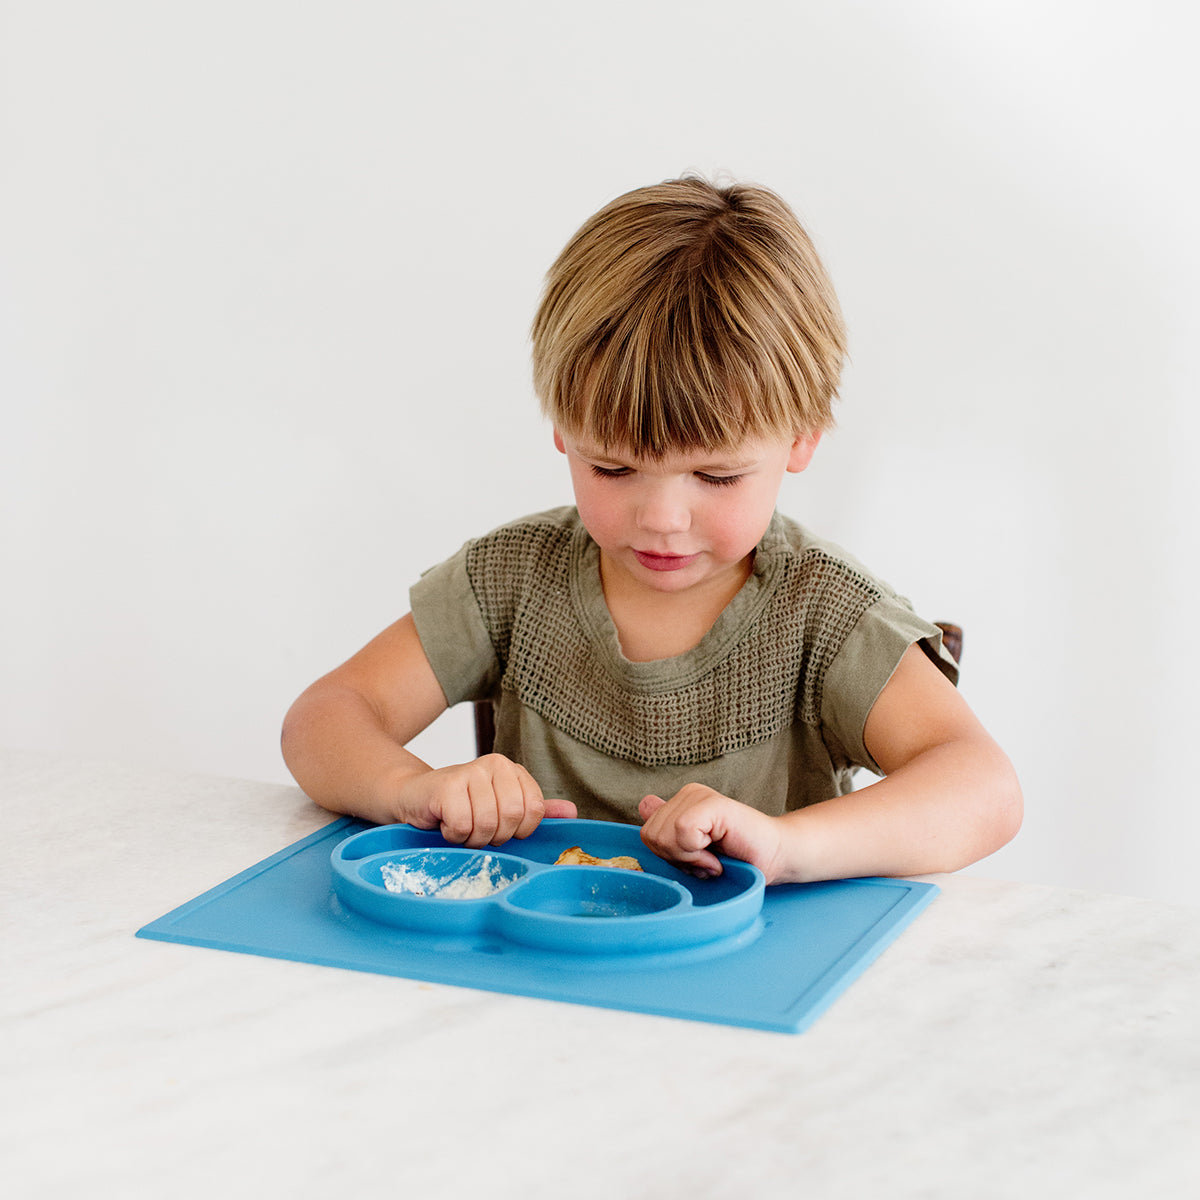 Happy Mat in Blue by ezpz / The Original All-In-One Silicone Plates & Placemats that Stick to the Table